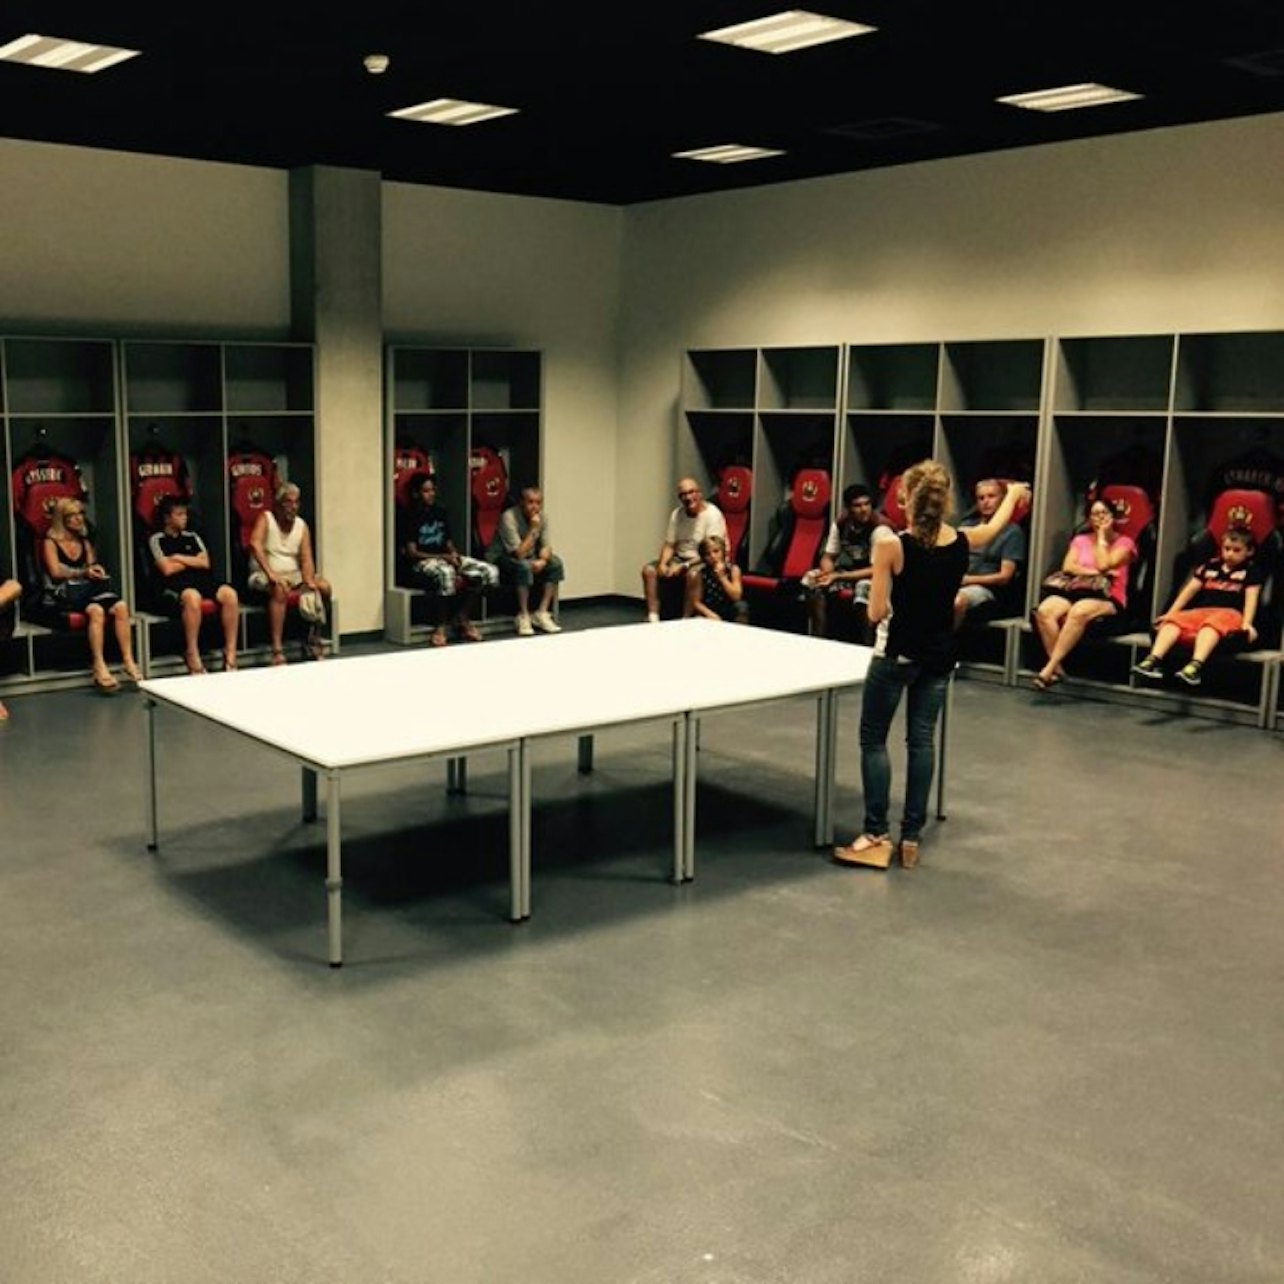 Allianz Riviera Stadium & Musée National du Sport: Guided Tour - Accommodations in Nice